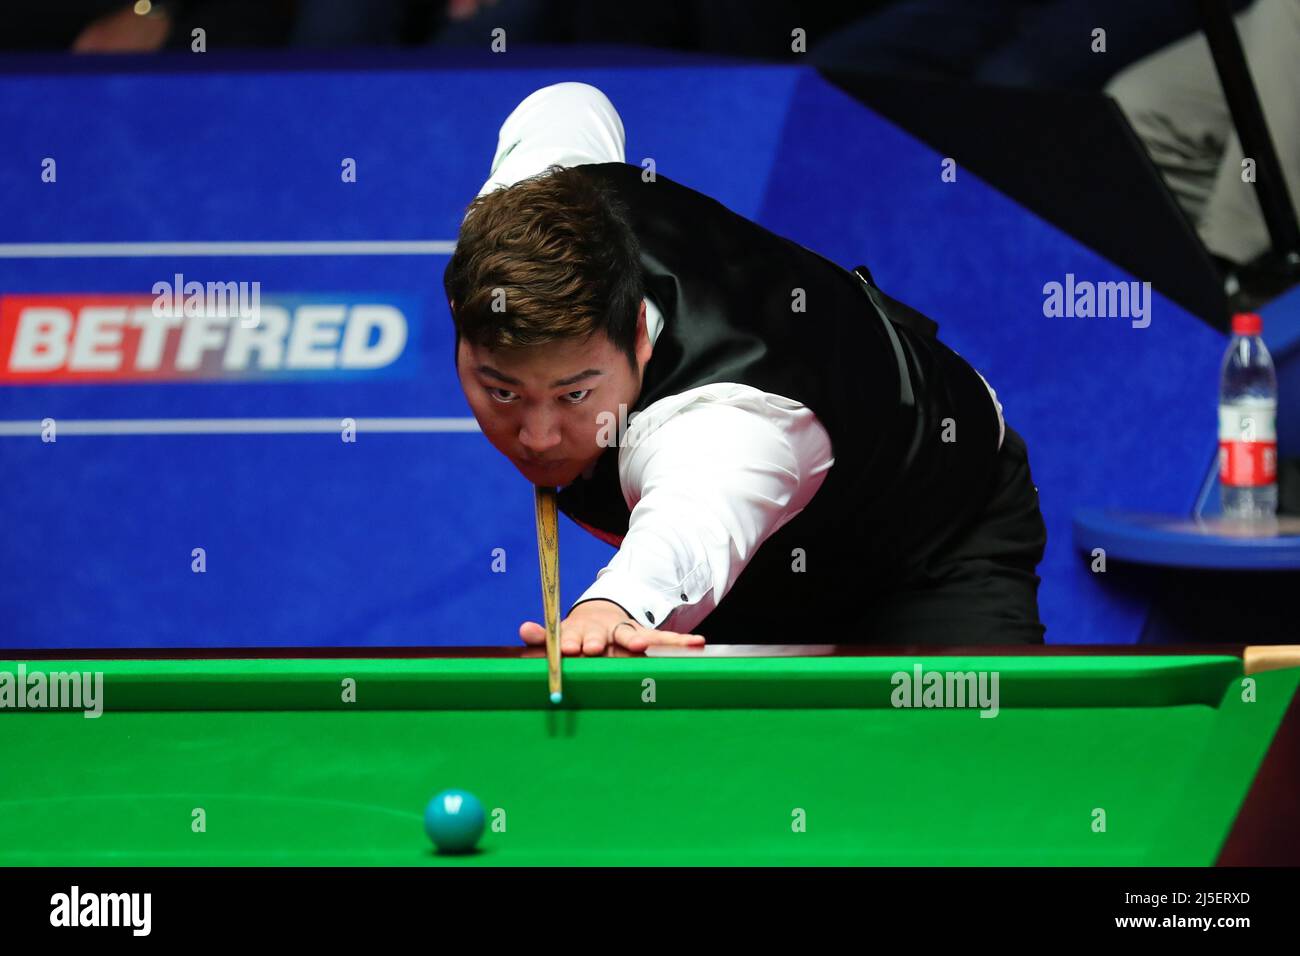 Mark Selby against Yan Bingtao during day seven of the Betfred World Snooker Championships at The Crucible, Sheffield